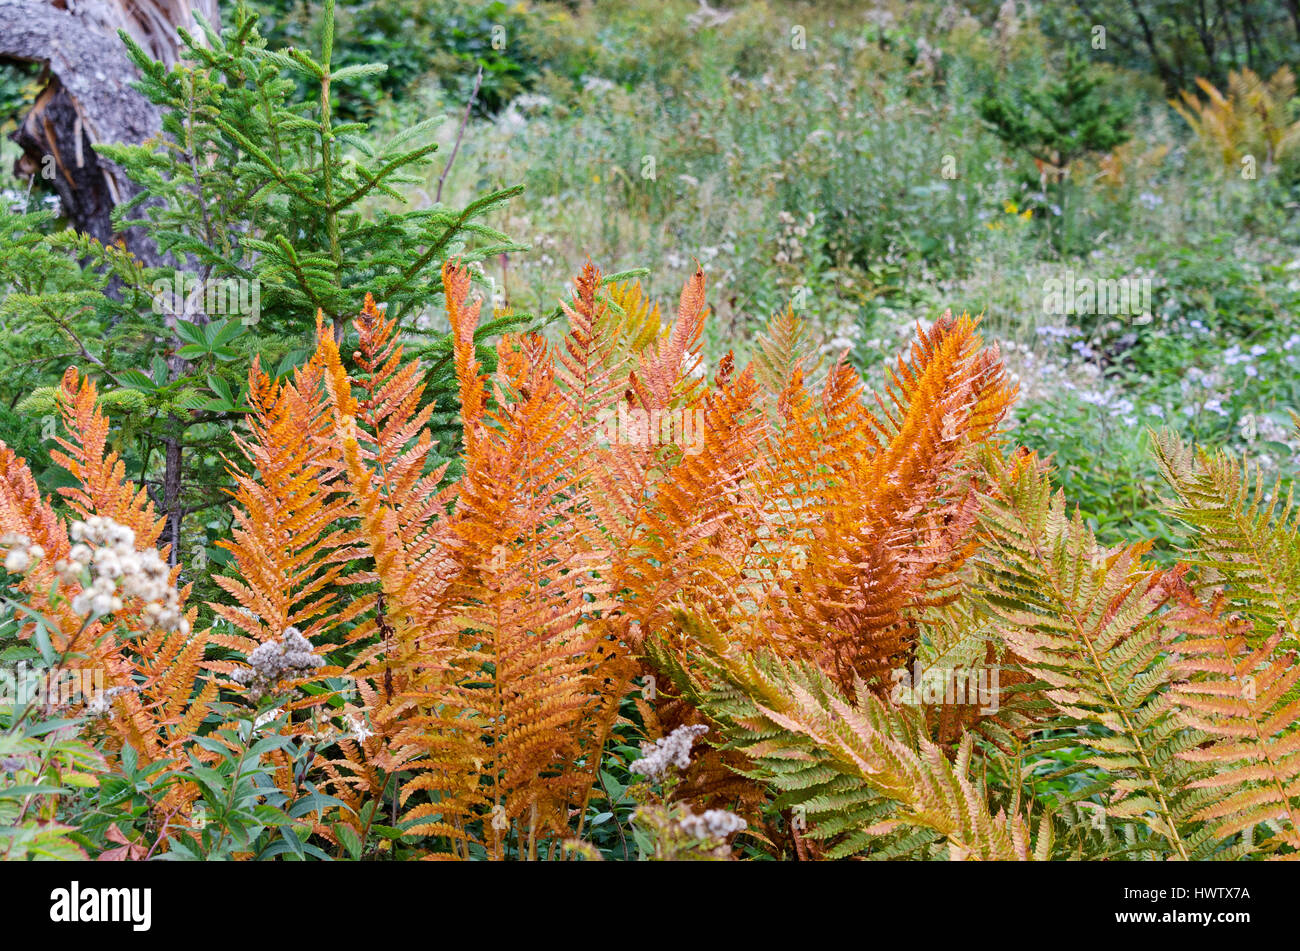 Cinnamon fern fronds turning coppery brown in autumn, Islesford, Maine. Stock Photo